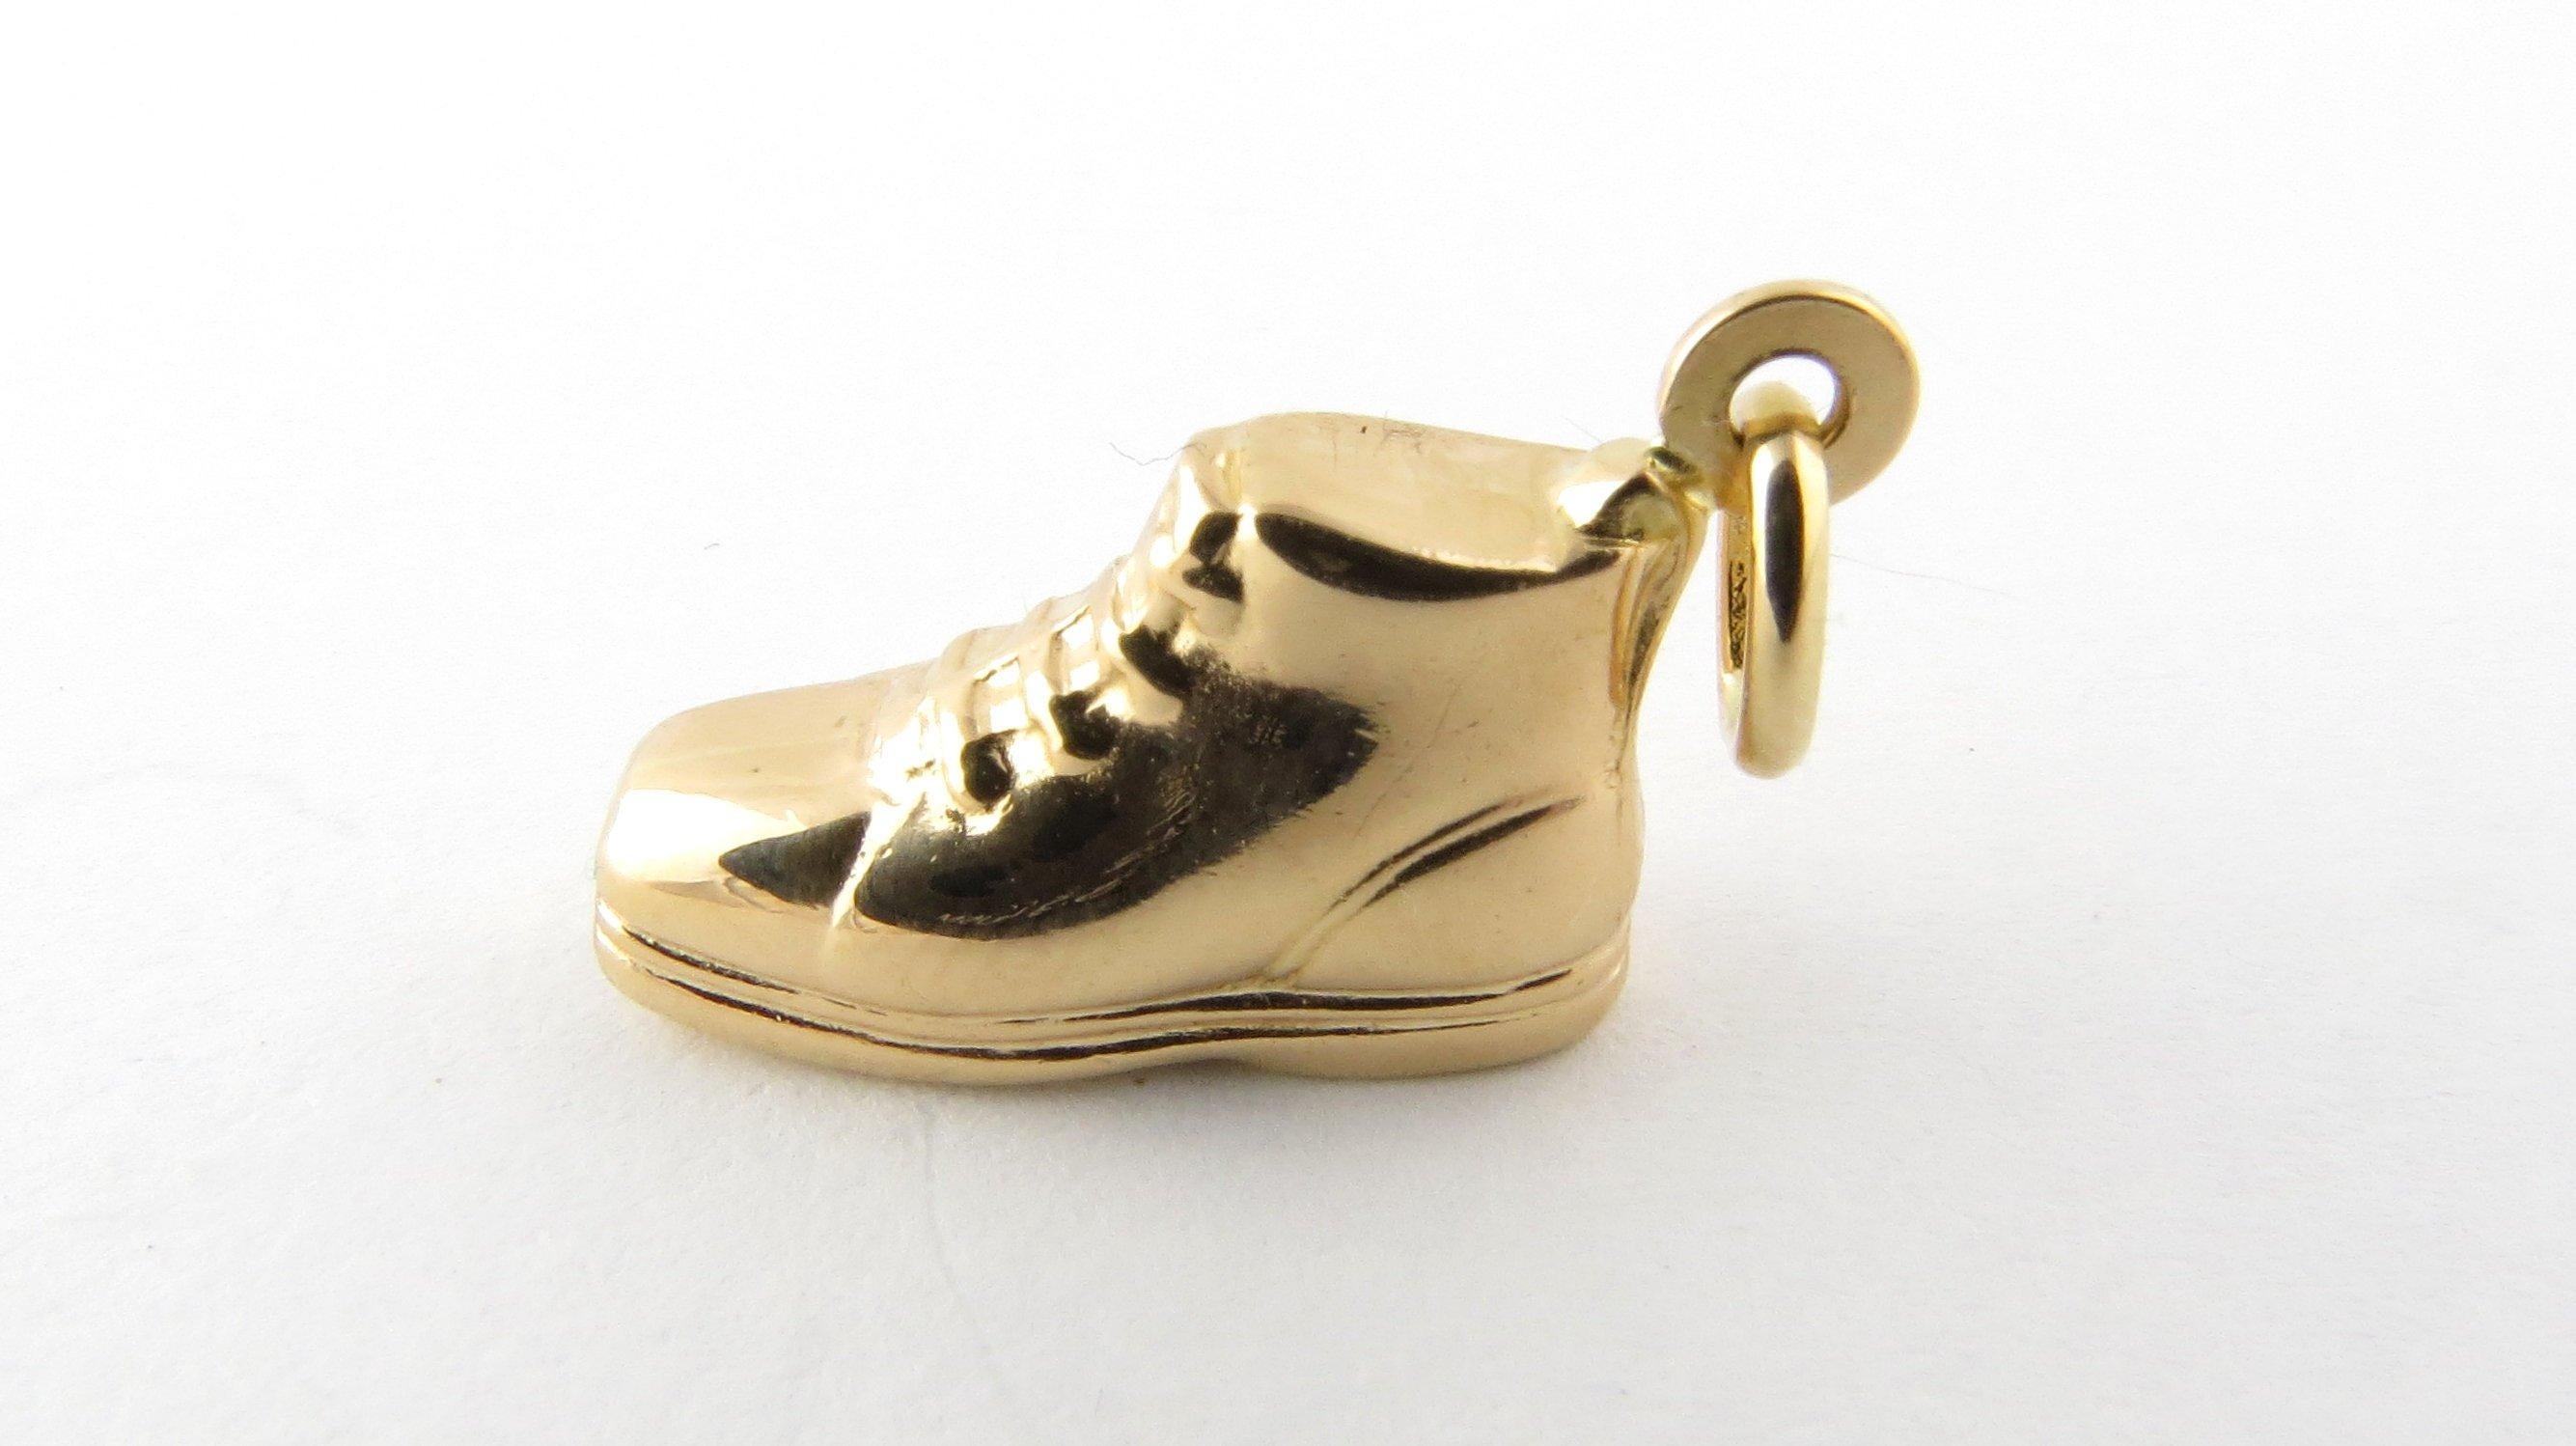 Vintage 18 Karat Yellow Gold Boot Charm
This beautifully crafted charm features a miniature 3D boot meticulously detailed in 18K yellow gold. 
Size: 13 mm x 16 mm (actual charm) 
Weight: 1.0 dwt. / 1.6 gr. 
Hallmark: 750 
Very good condition,